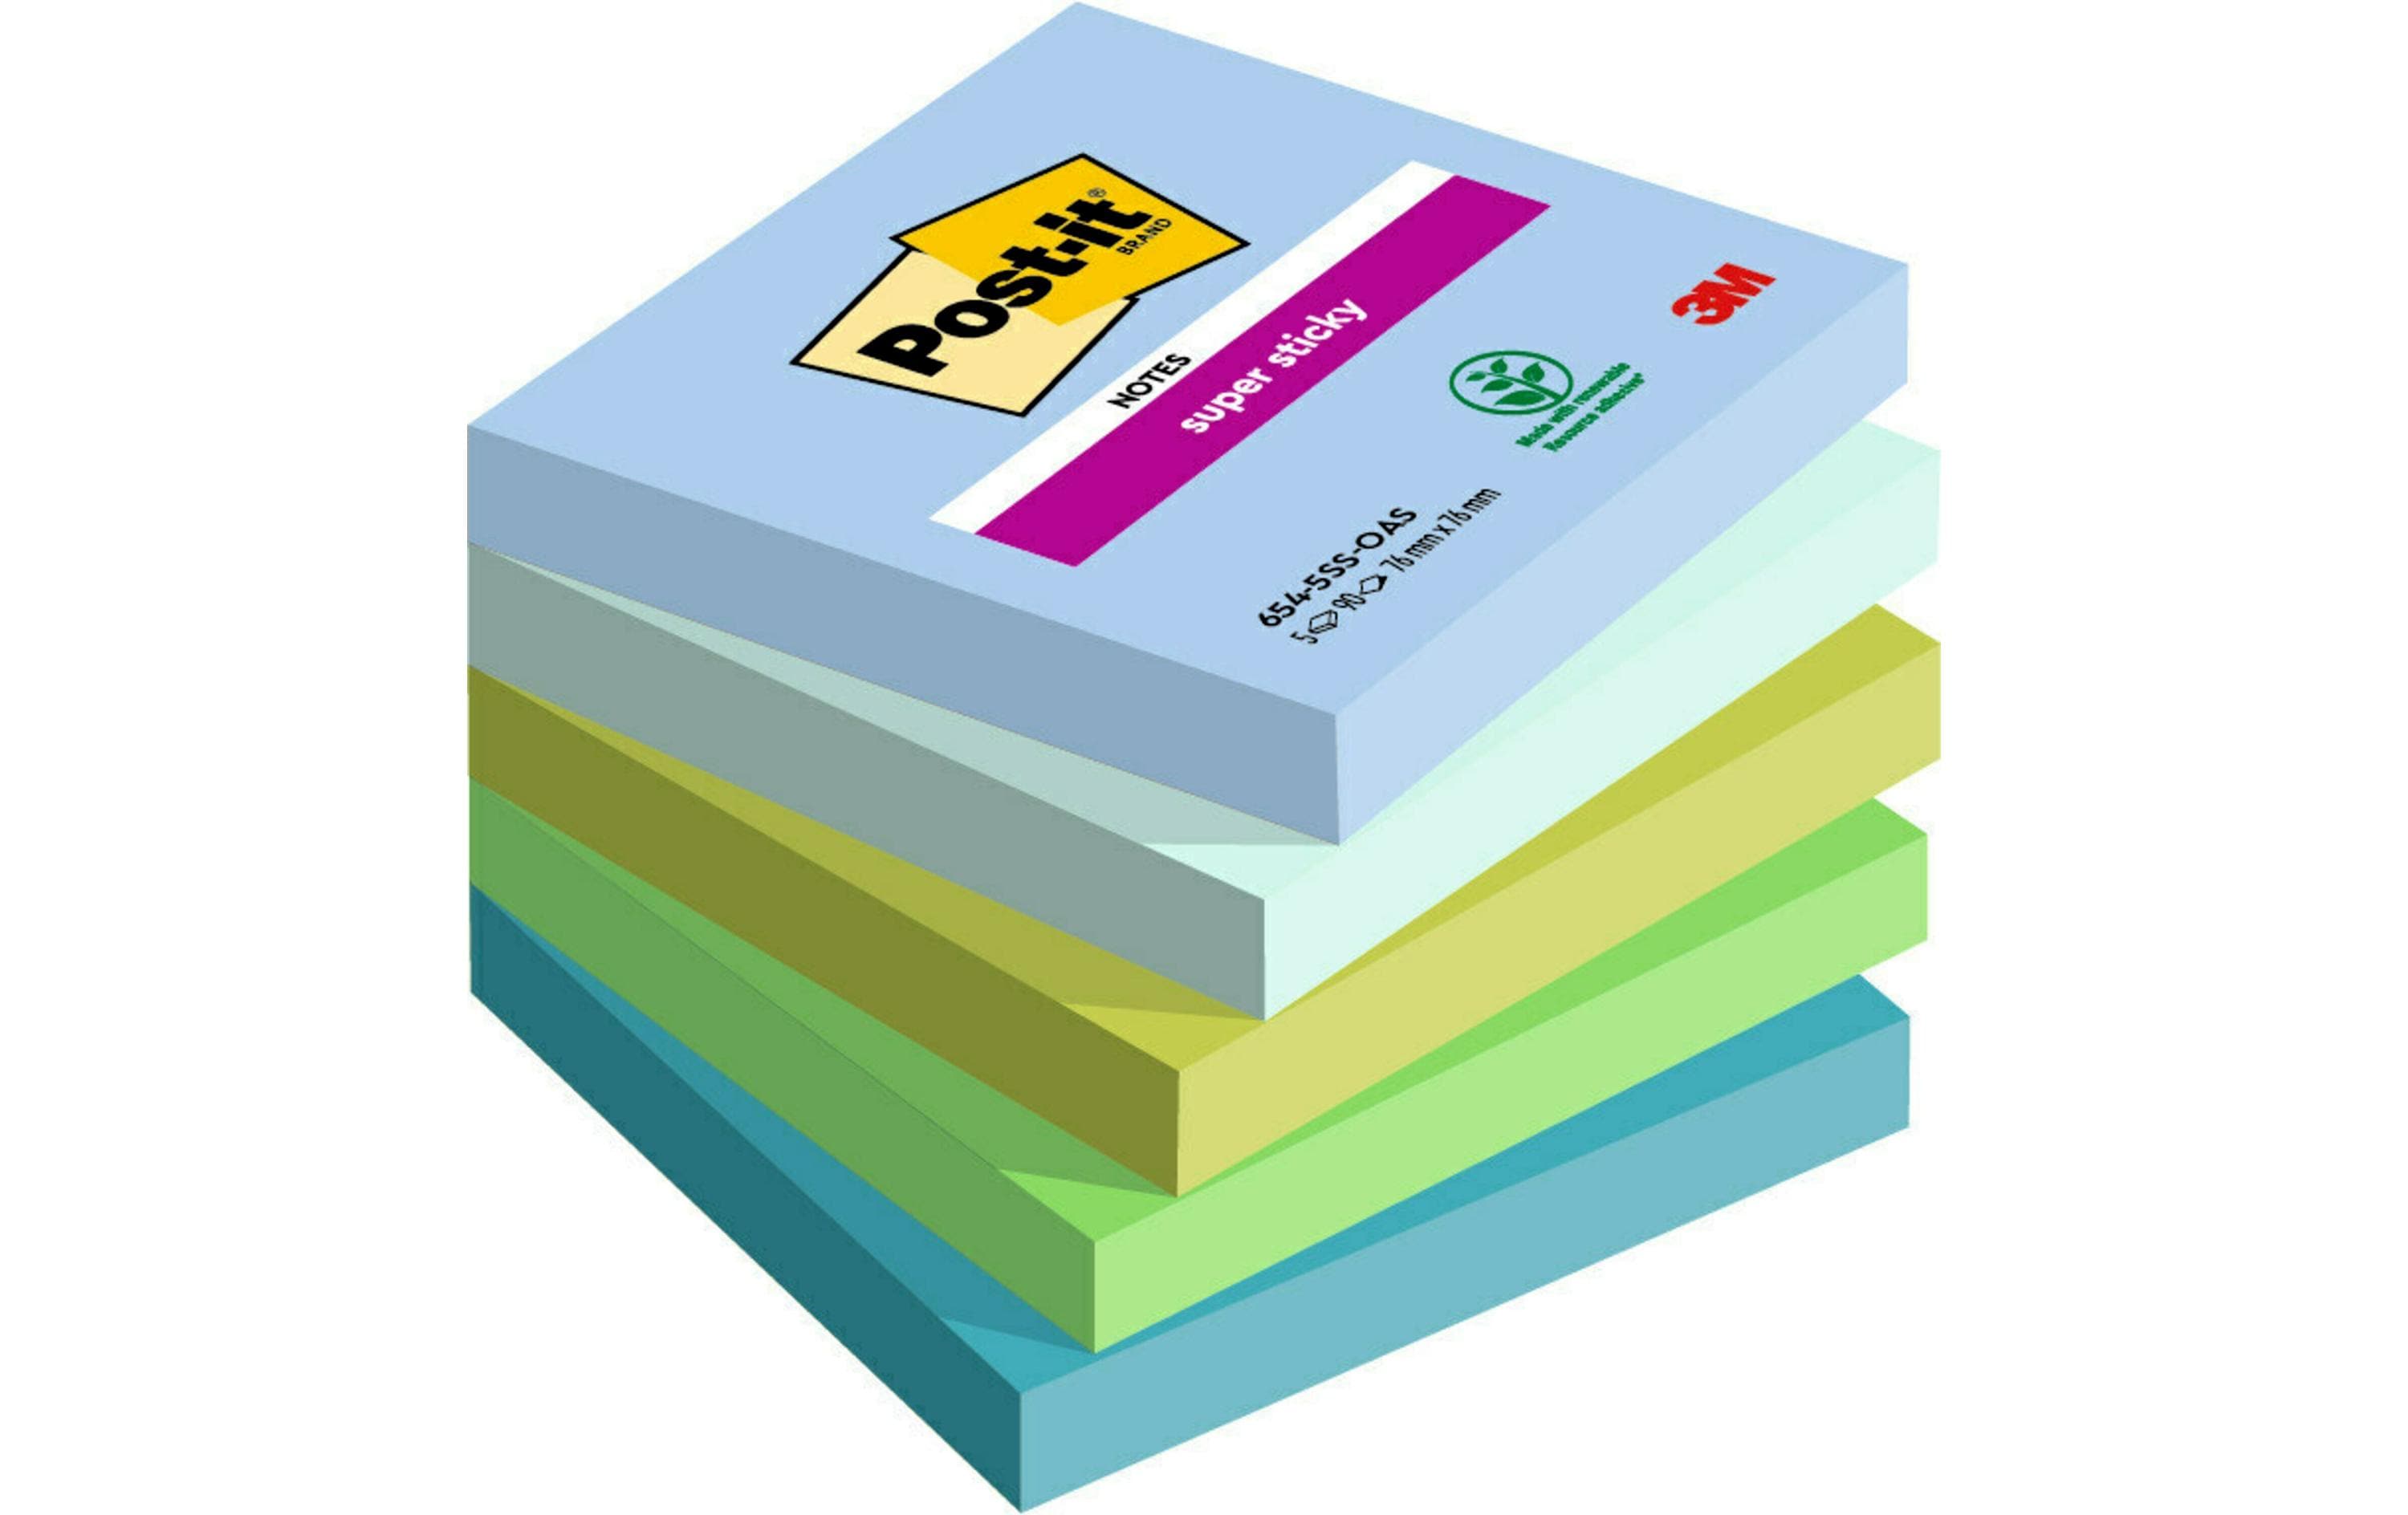 Post-it Notizzettel Super Sticky Oasis Collection 76 x 76 mm